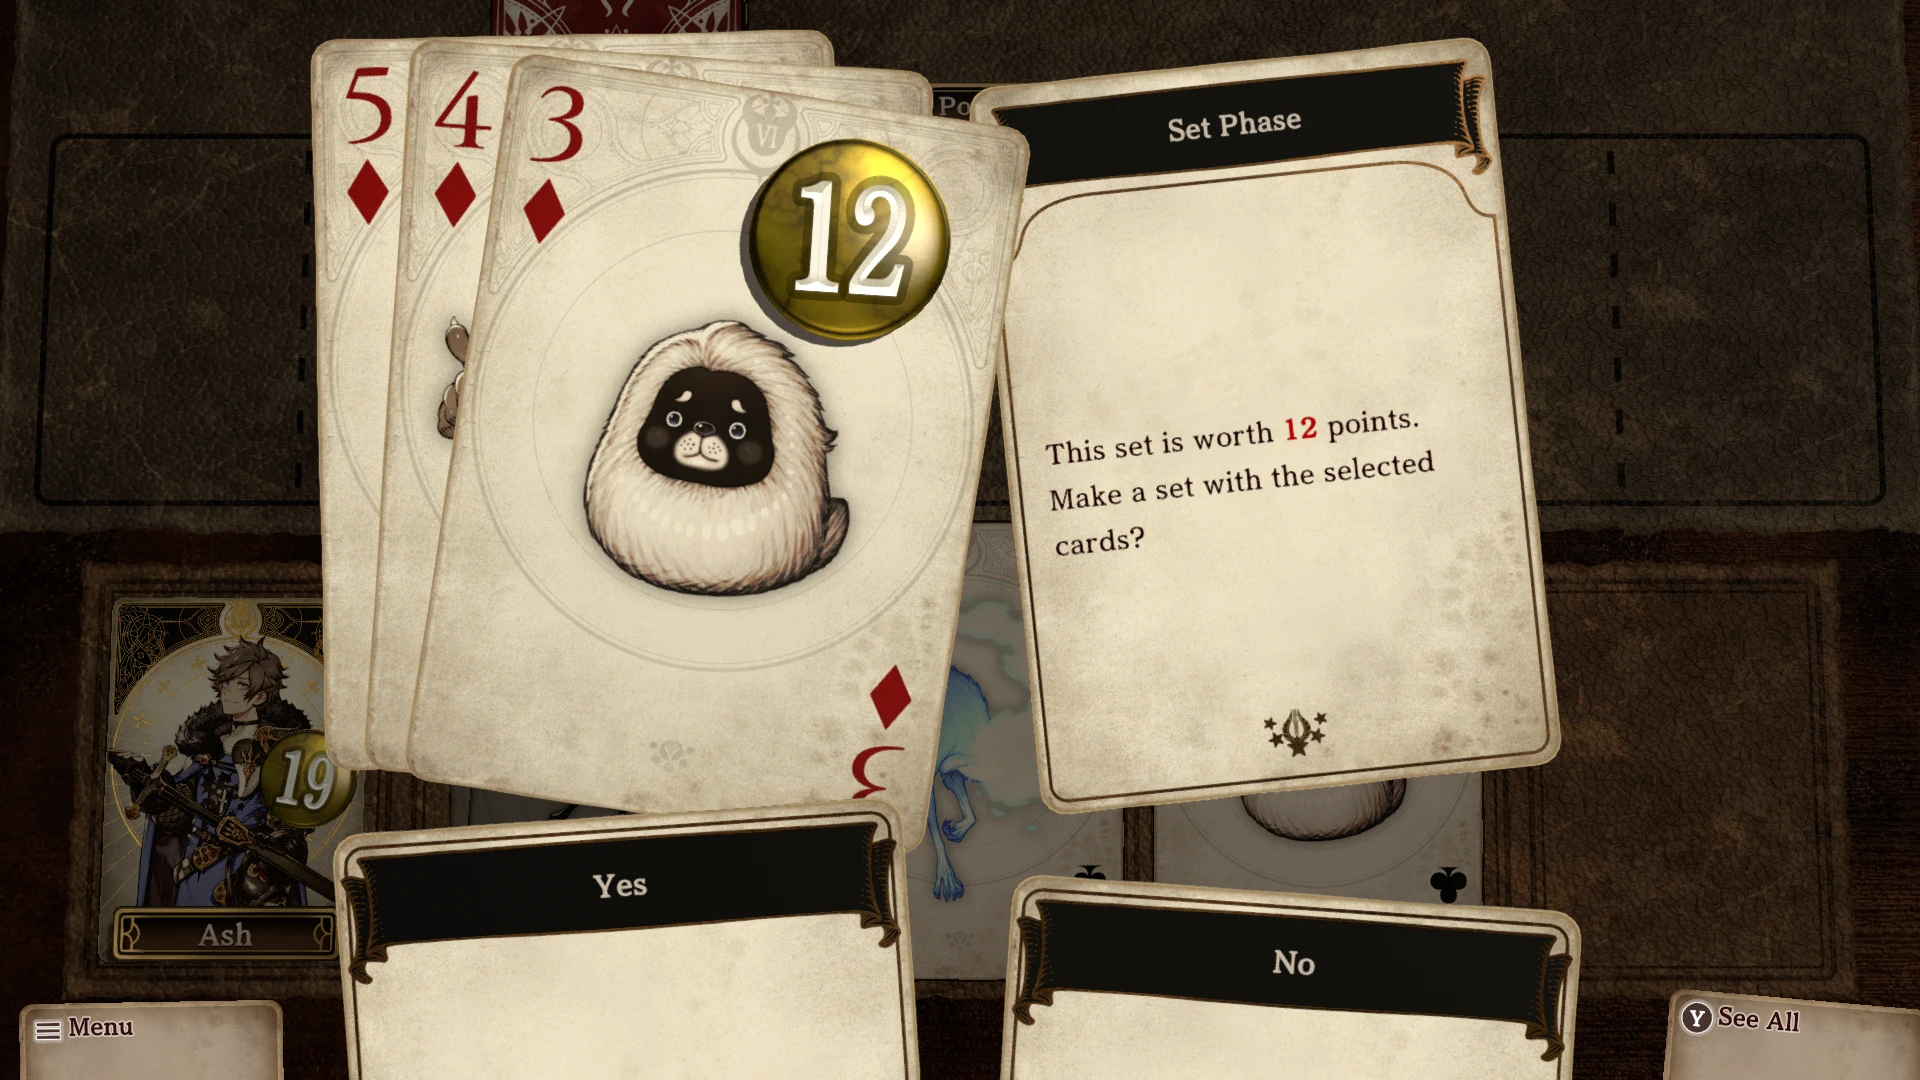 An image of the set matching card game in the game parlor